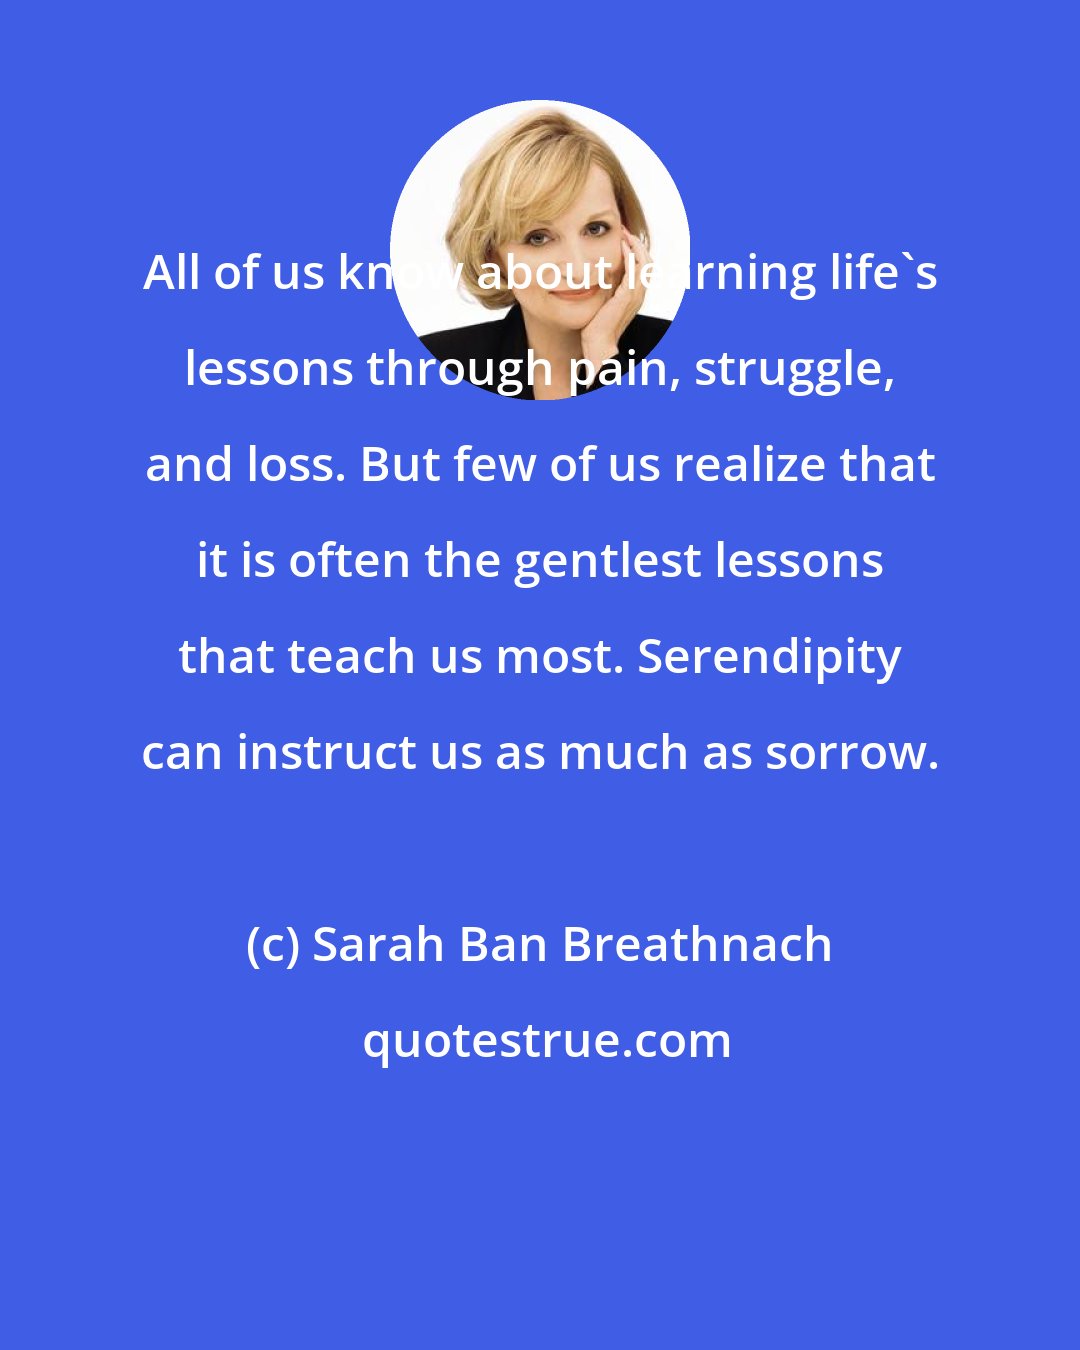 Sarah Ban Breathnach: All of us know about learning life's lessons through pain, struggle, and loss. But few of us realize that it is often the gentlest lessons that teach us most. Serendipity can instruct us as much as sorrow.